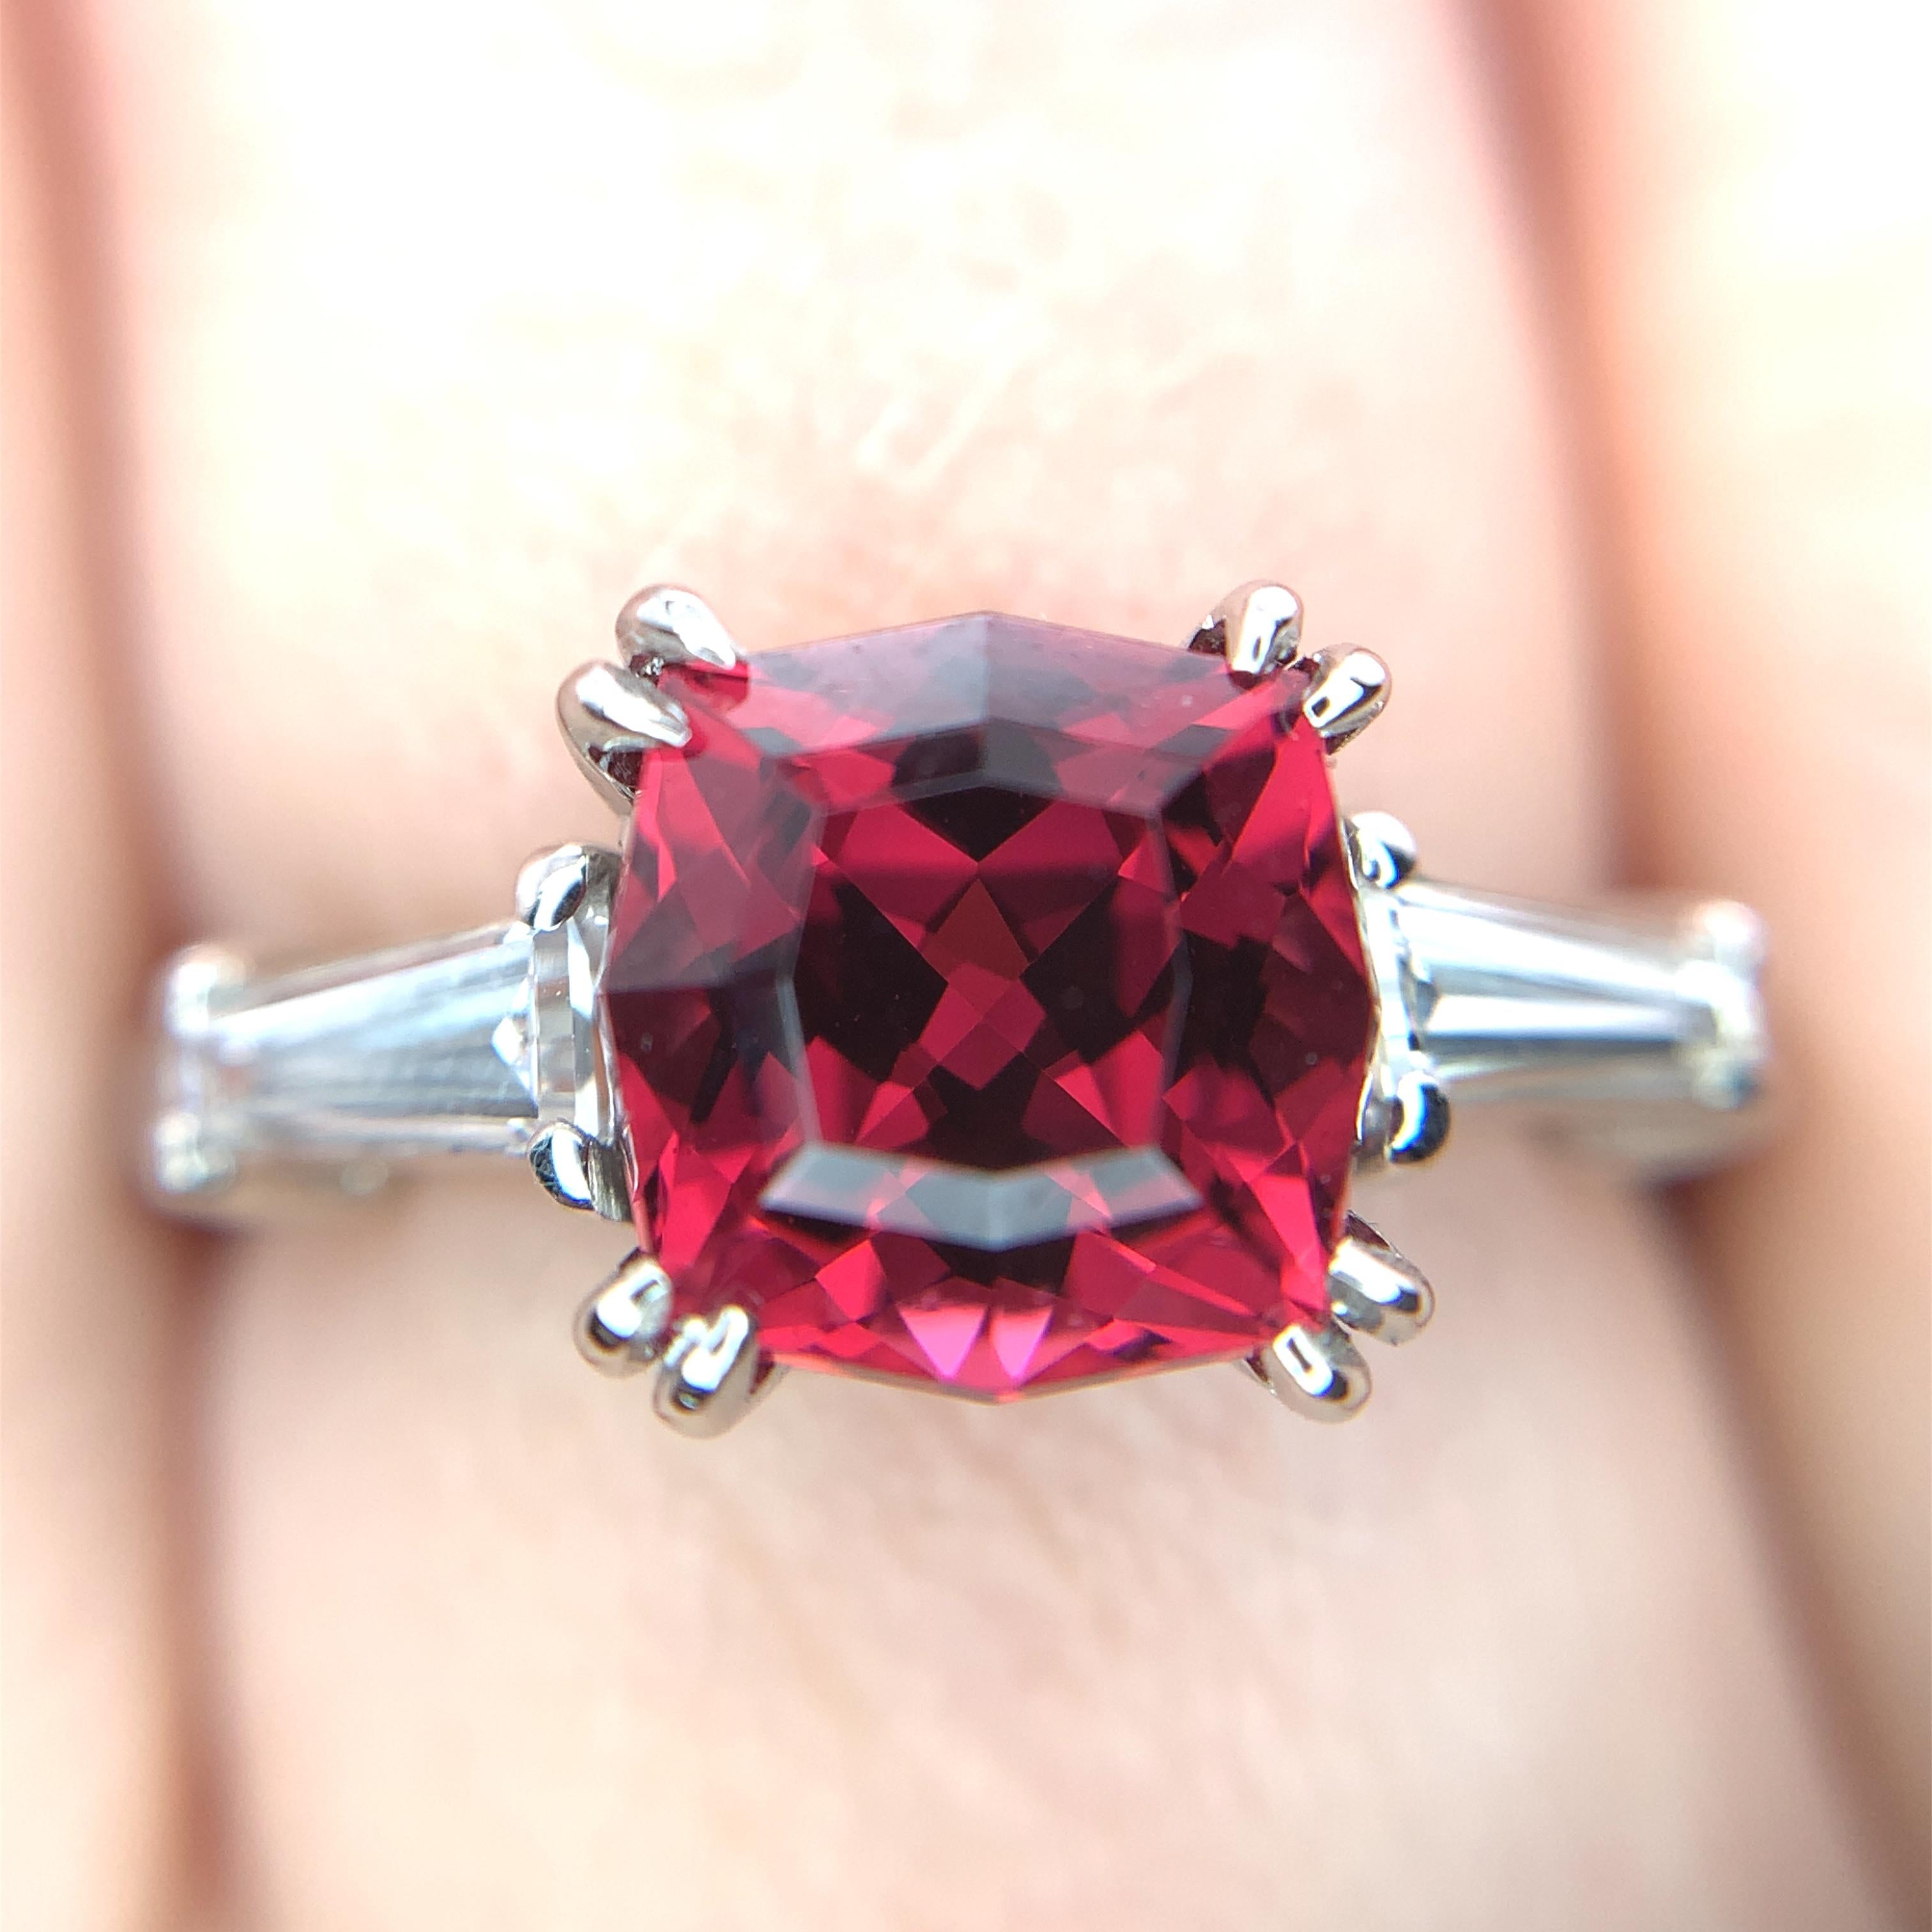 Platinum garnet and diamond ring featuring a 3 carat cushion cut red garnet with tapered diamond baguettes. The garnet has red wine or Bing cherry type burgundy red color. The cushion cut garnet measures about 7.5mm square and weighs 3.01 carats.